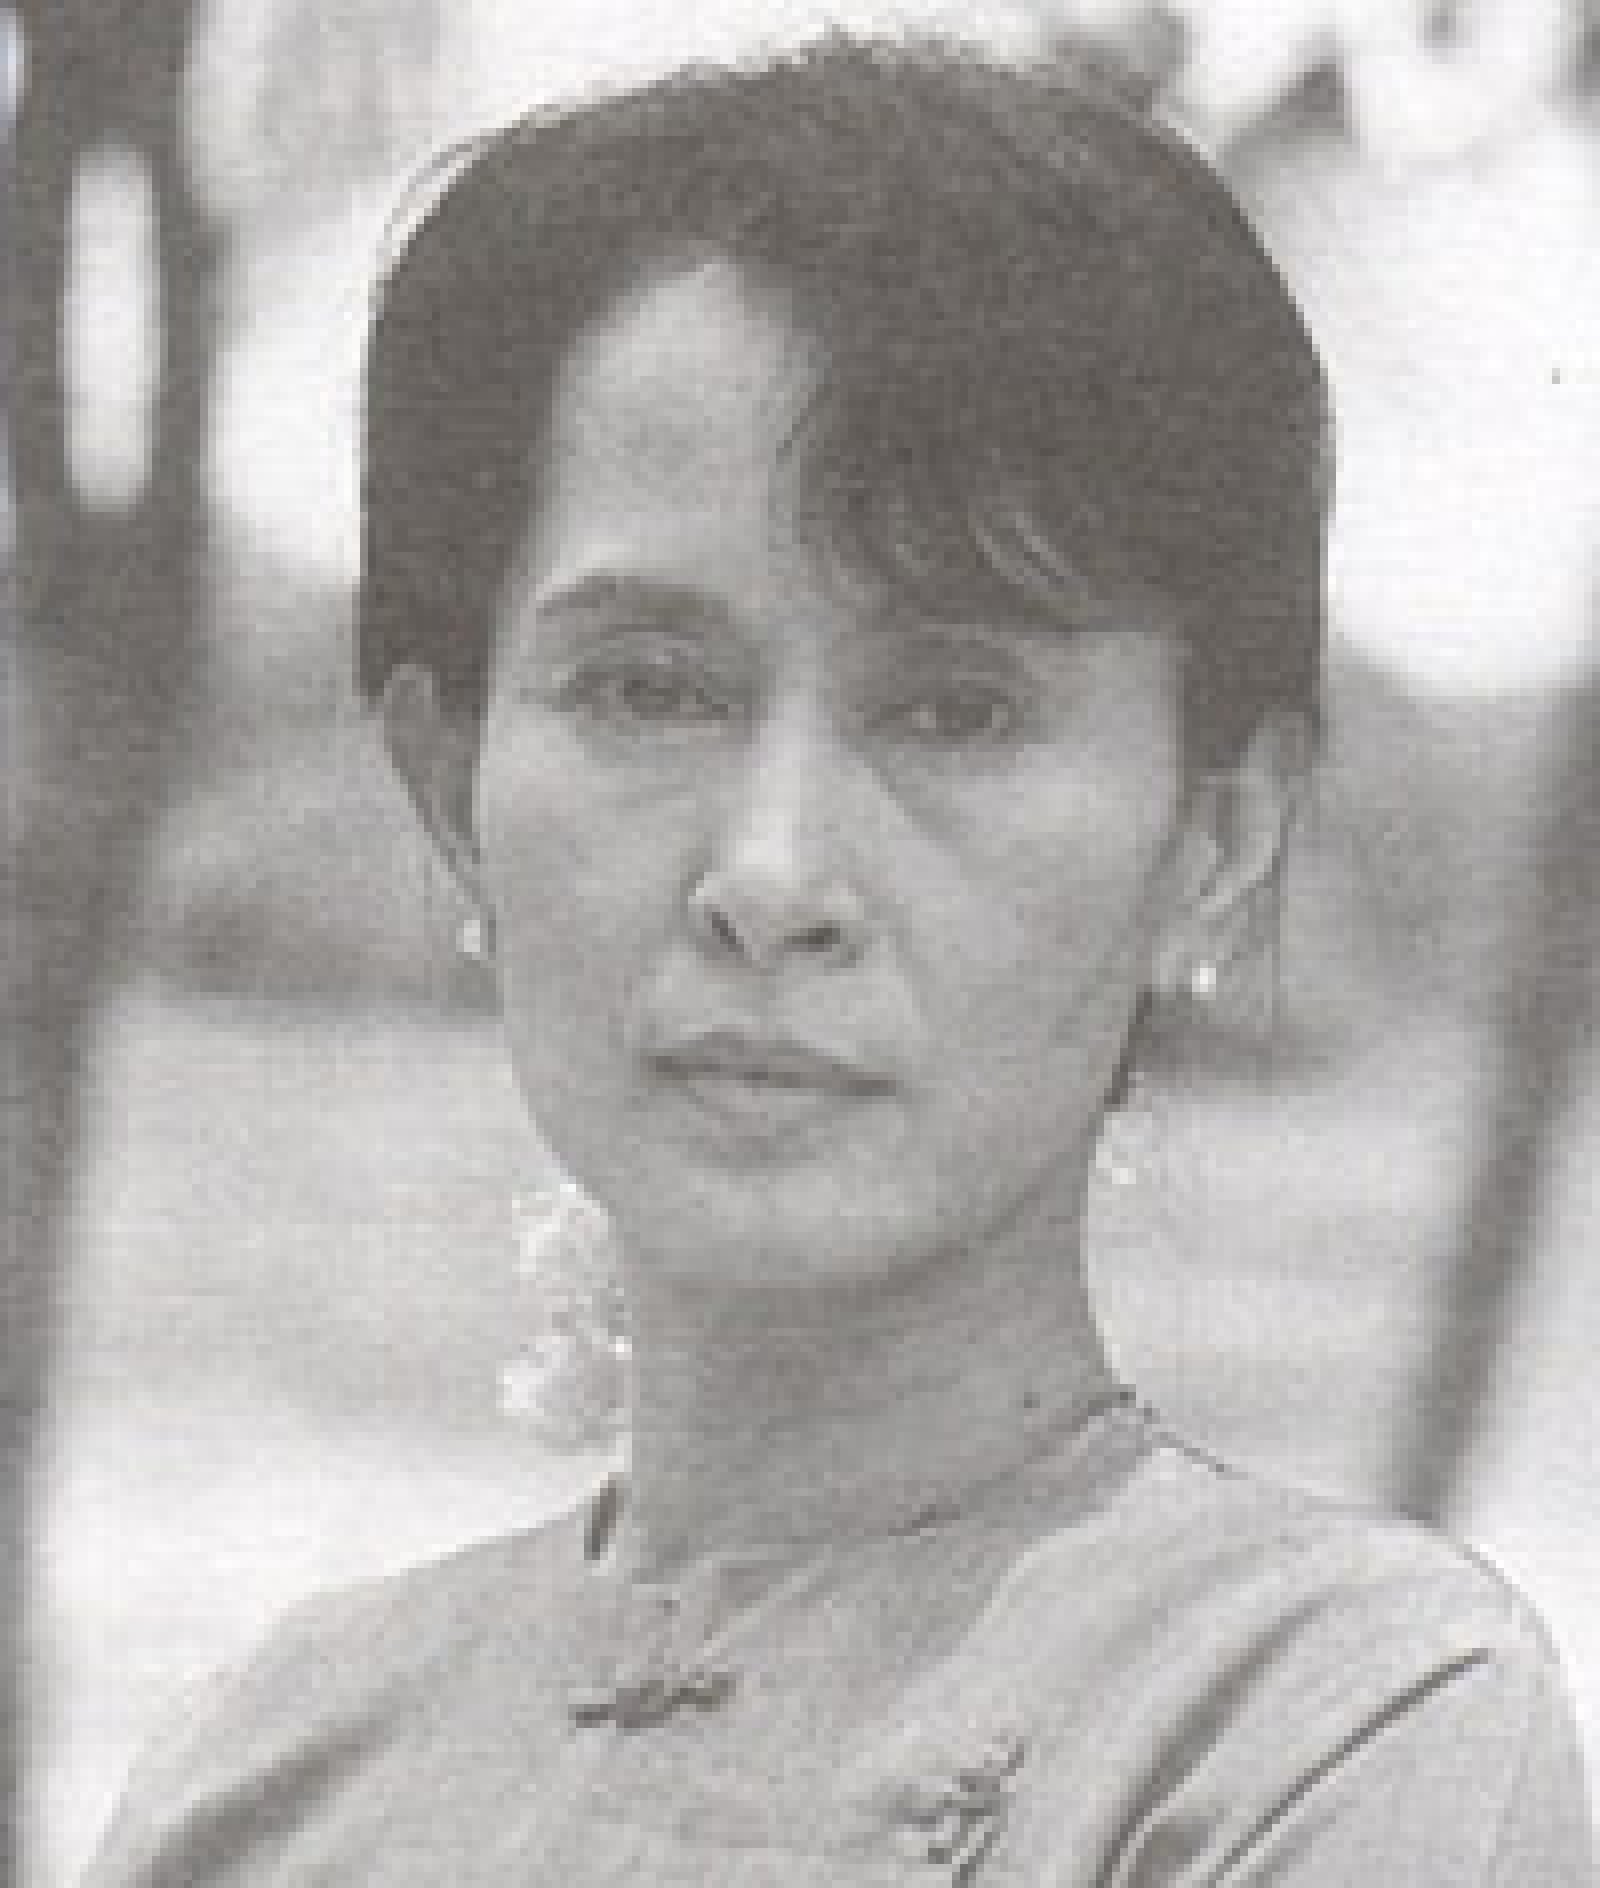 NDI Recognizes Courage of Aung San Suu Kyi, Calls on Burmese Regime to Seek National Reconciliation